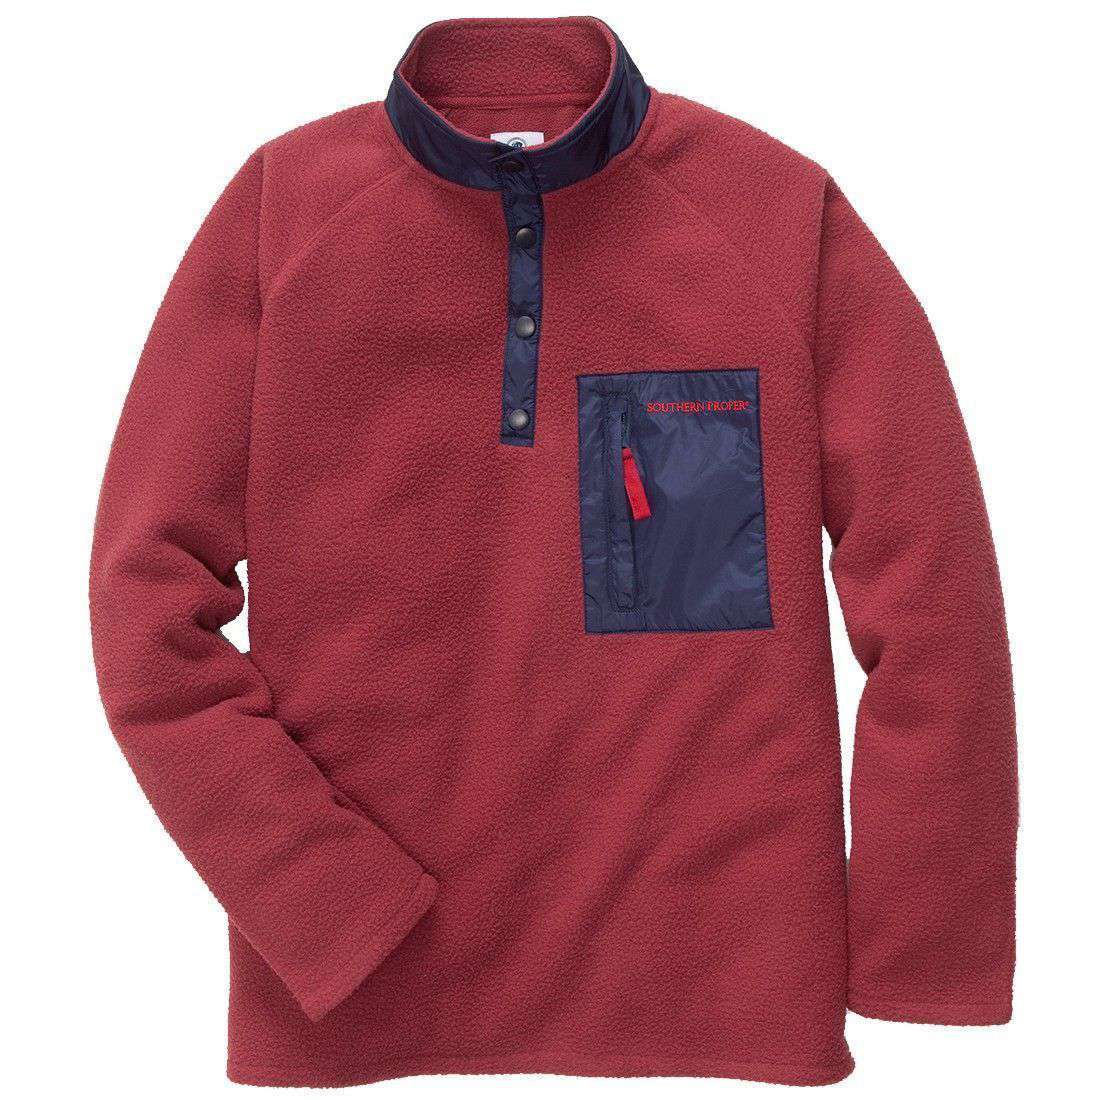 Dixon Pullover in Rust Red by Southern Proper - Country Club Prep